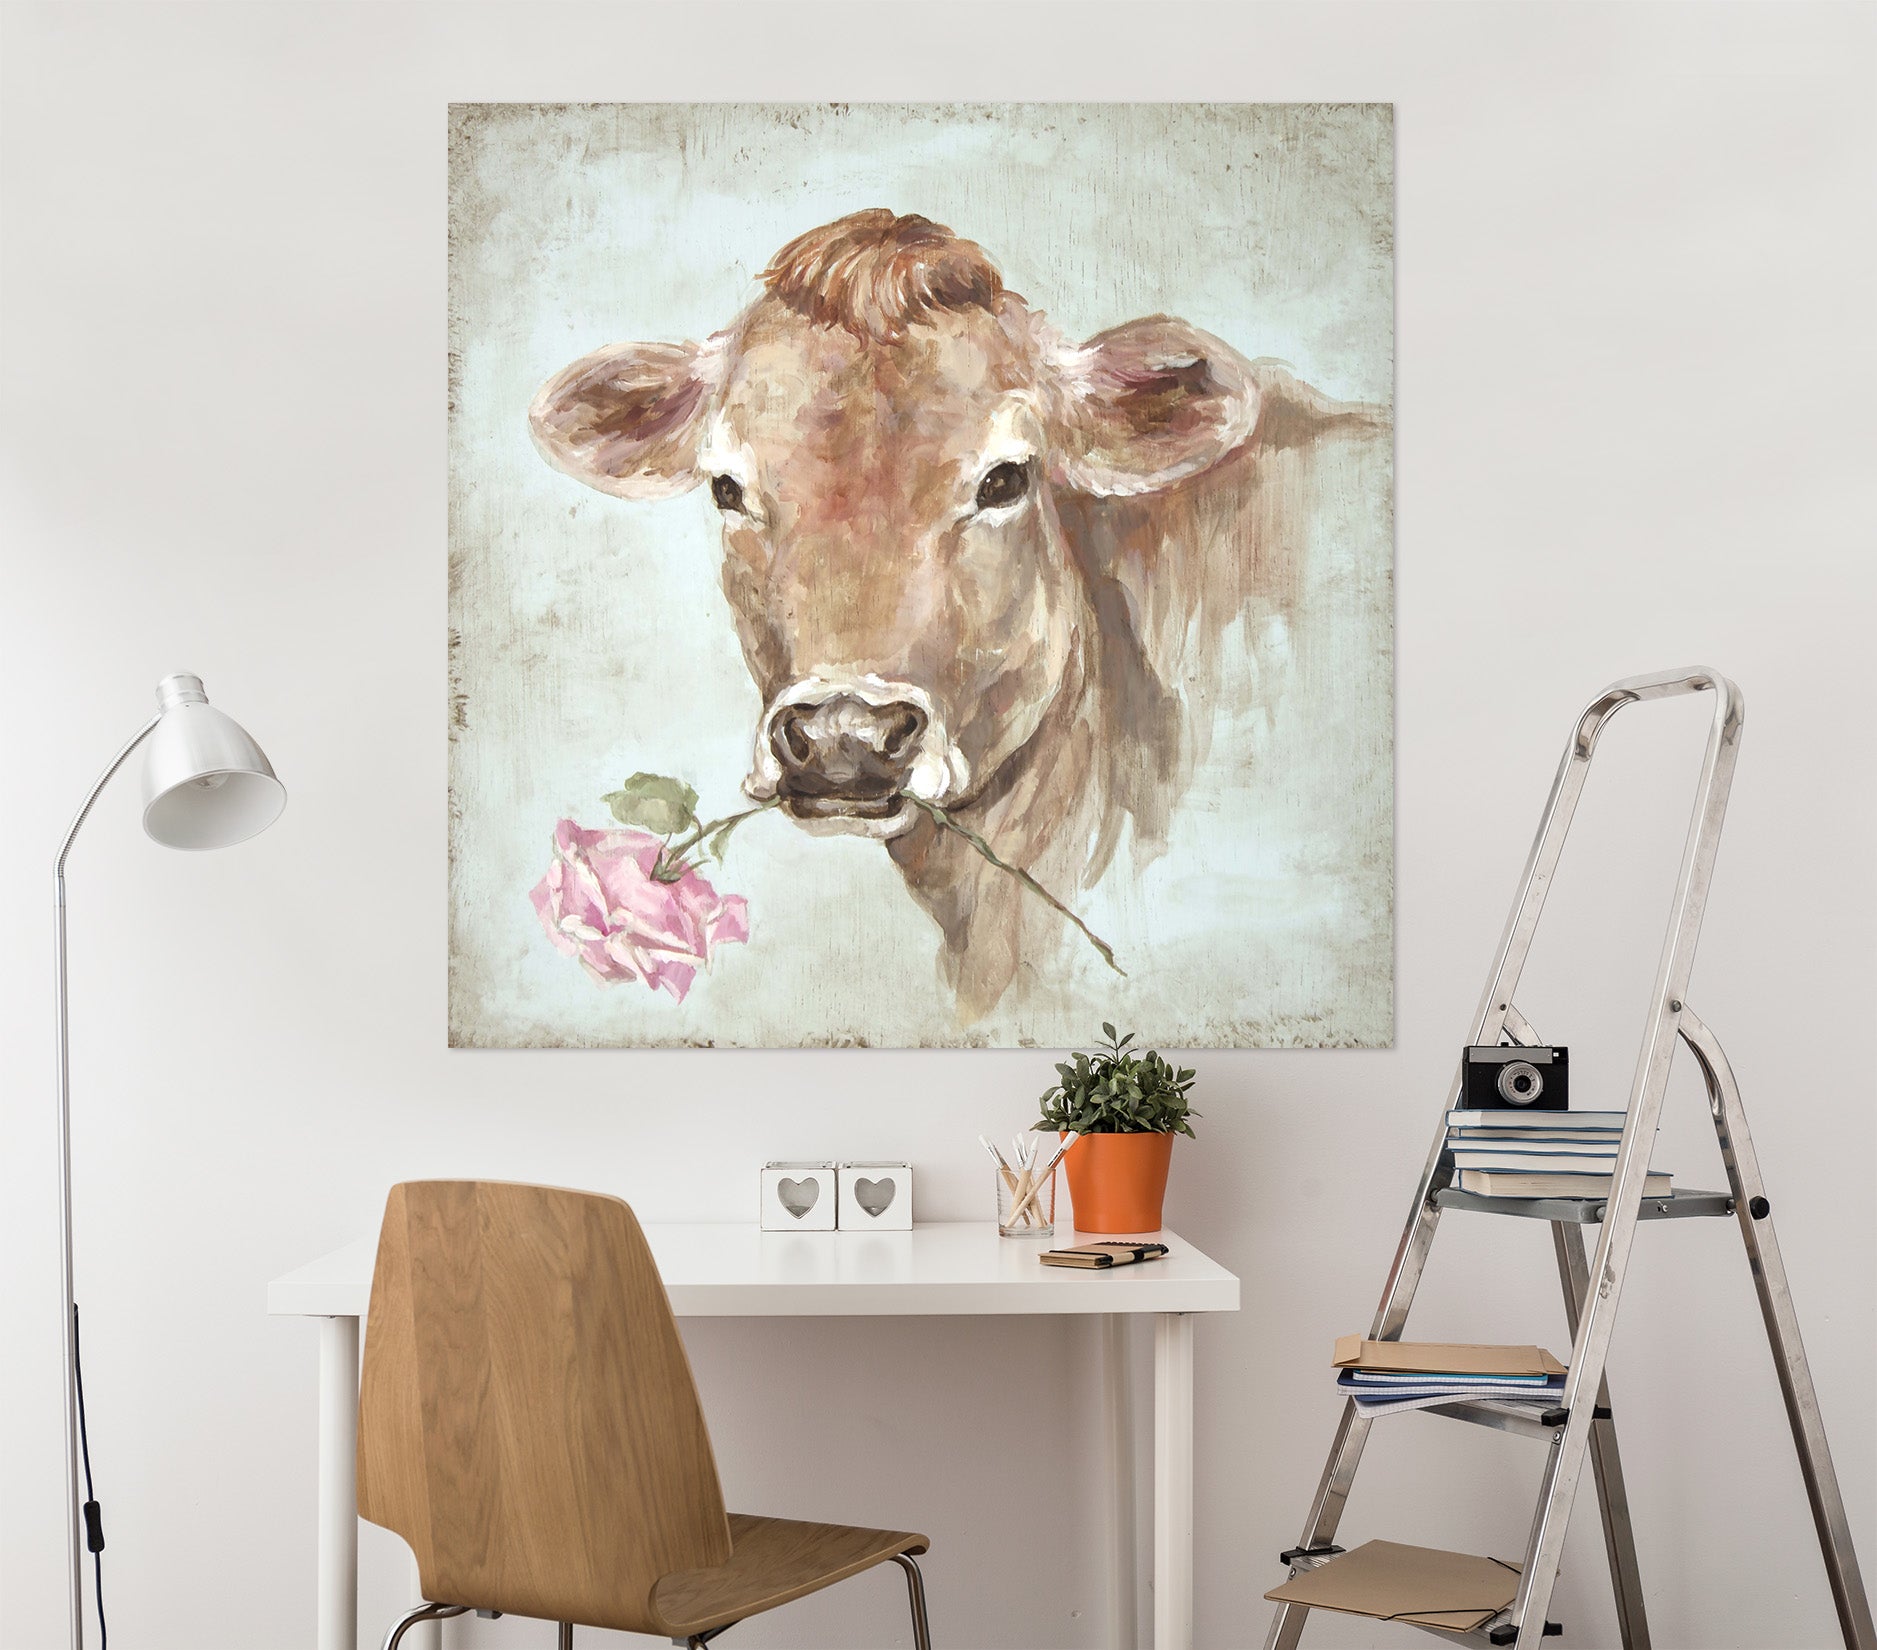 3D Cow Rose 003 Debi Coules Wall Sticker